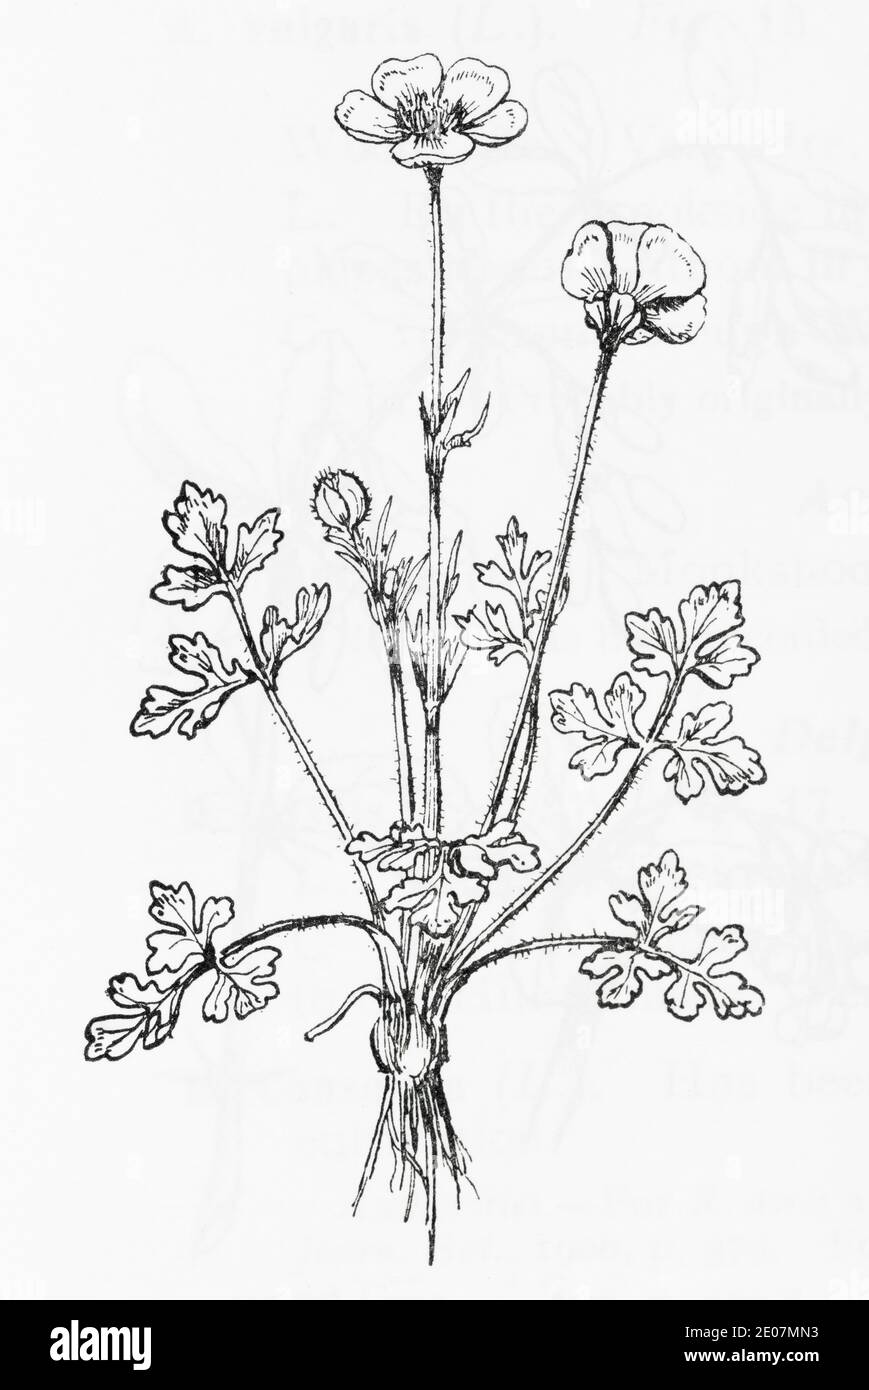 Old botanical illustration engraving of Bulbous Buttercup / Ranunculus bulbosus. Traditional medicinal herbal plant. See Notes Stock Photo